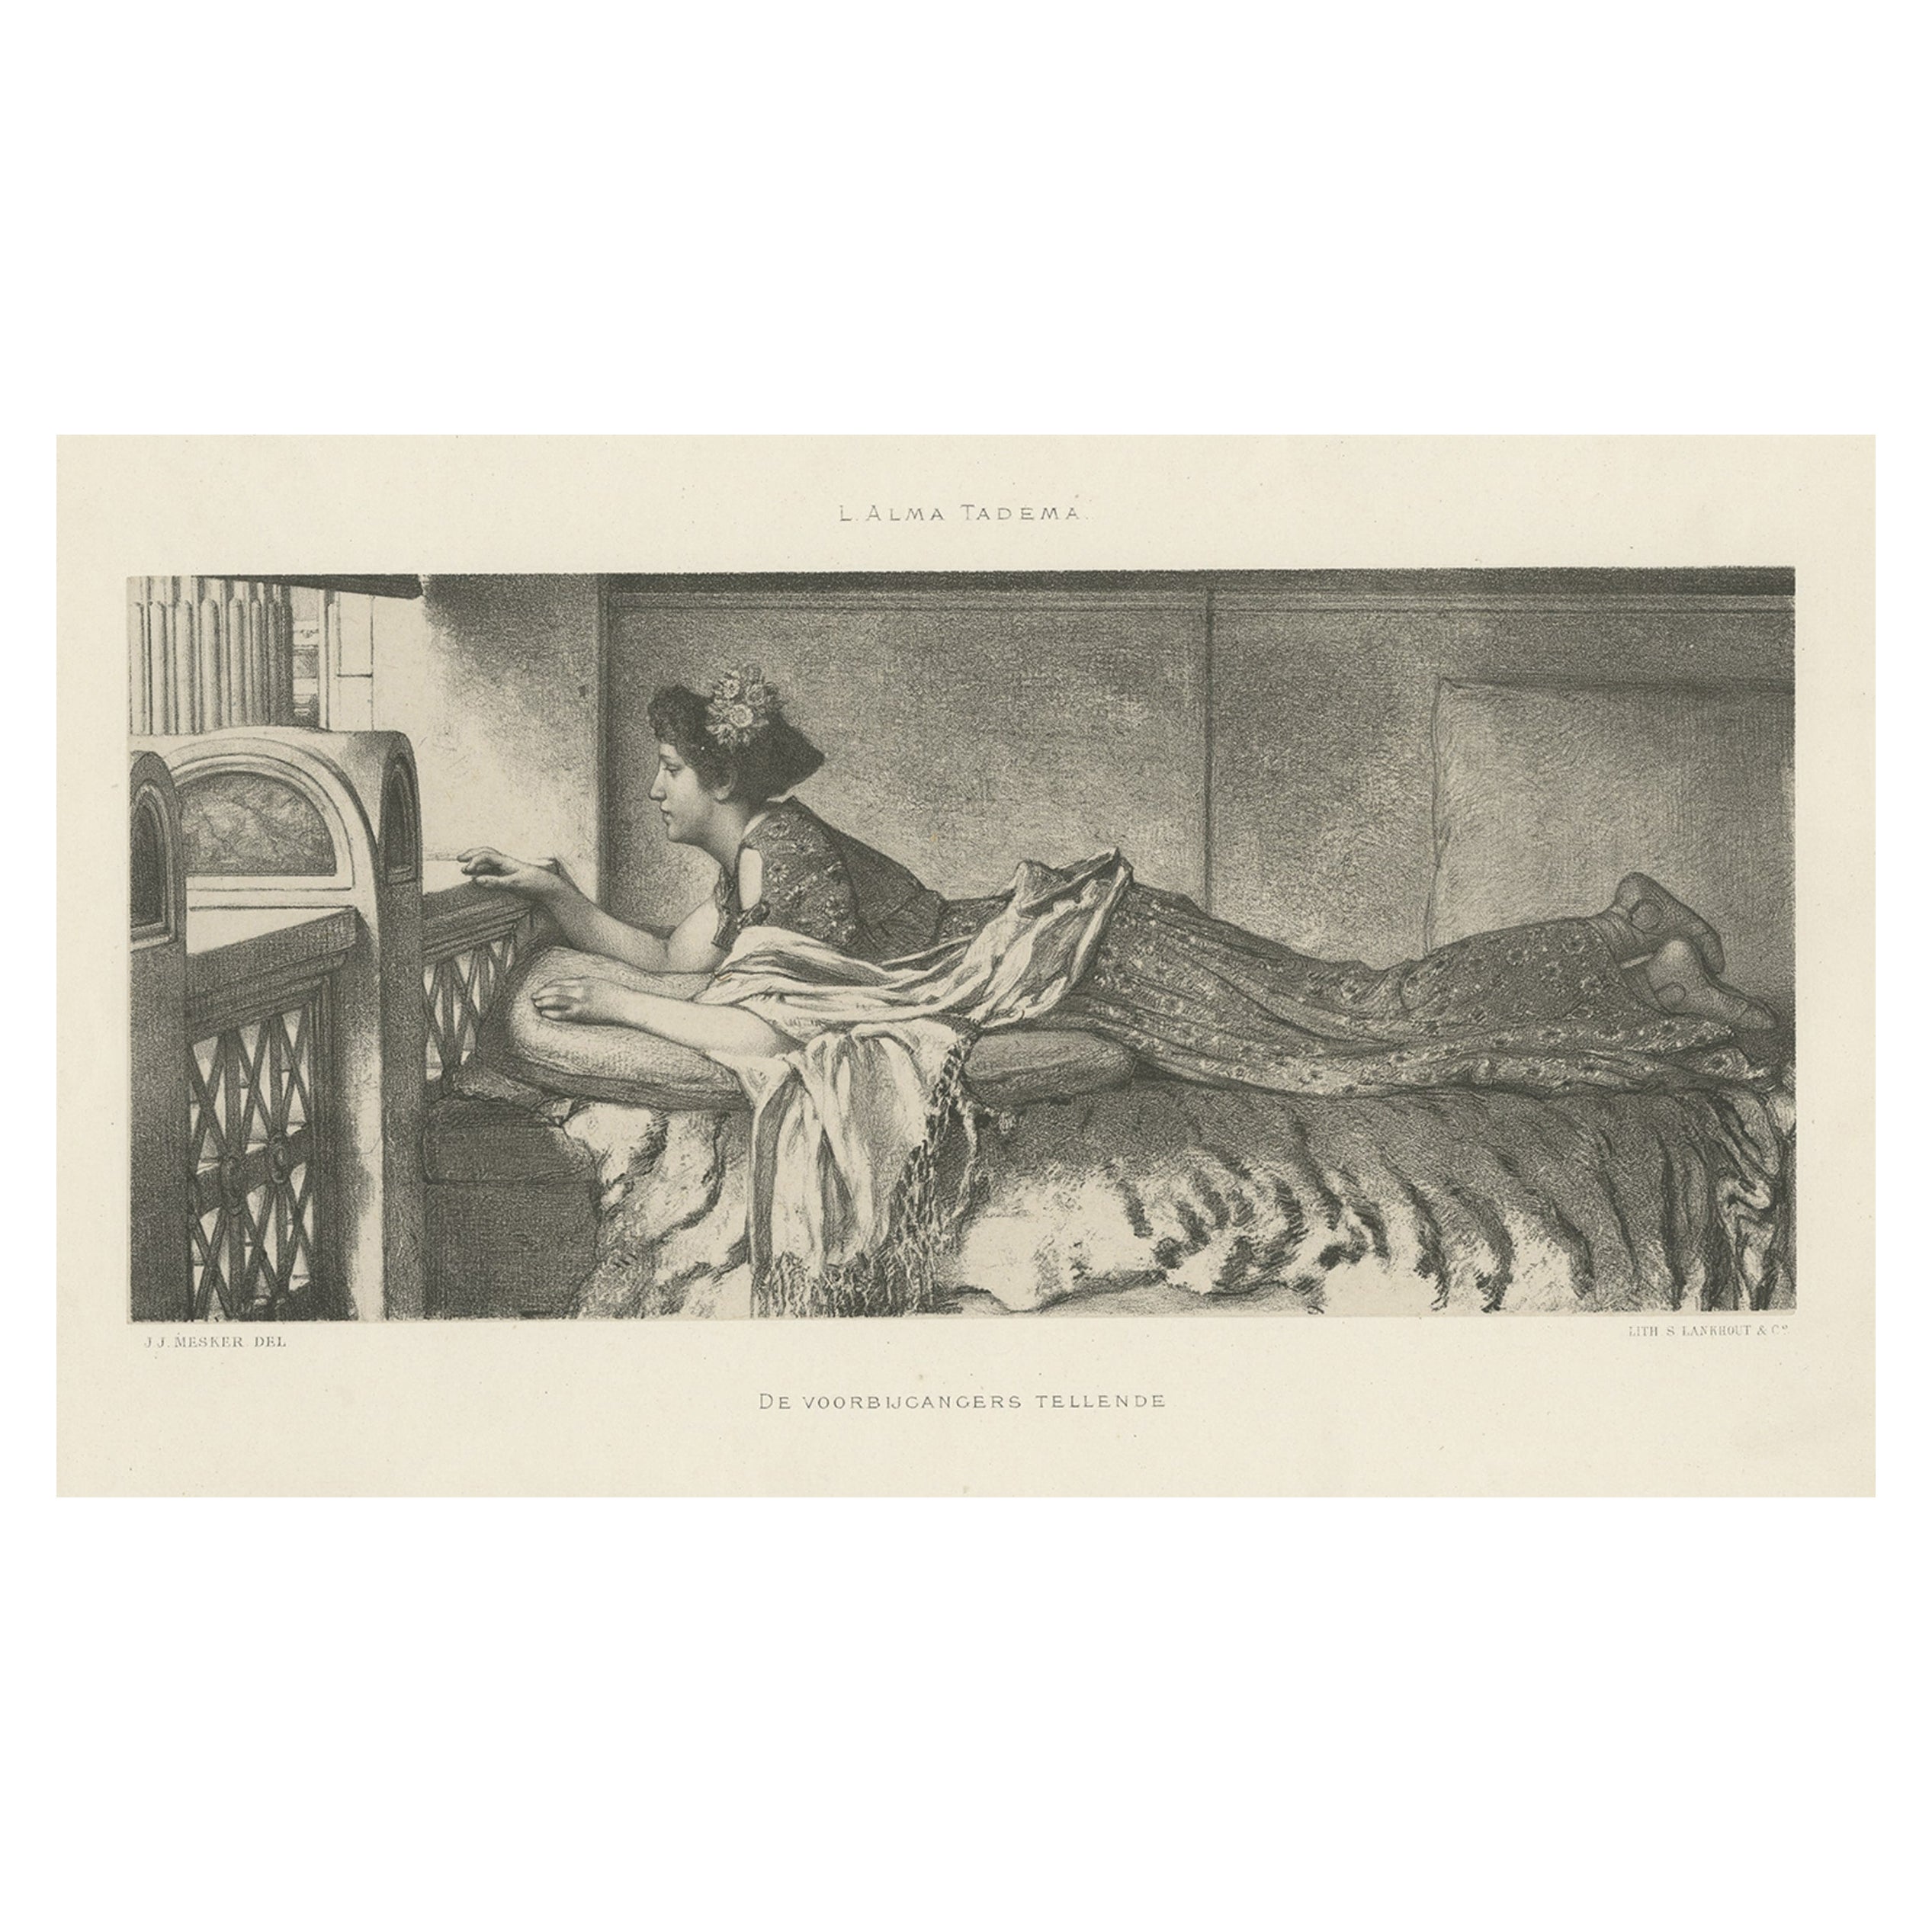 Antique Print of a Woman Counting Passerby's after a work of Alma Tadema, c.1890